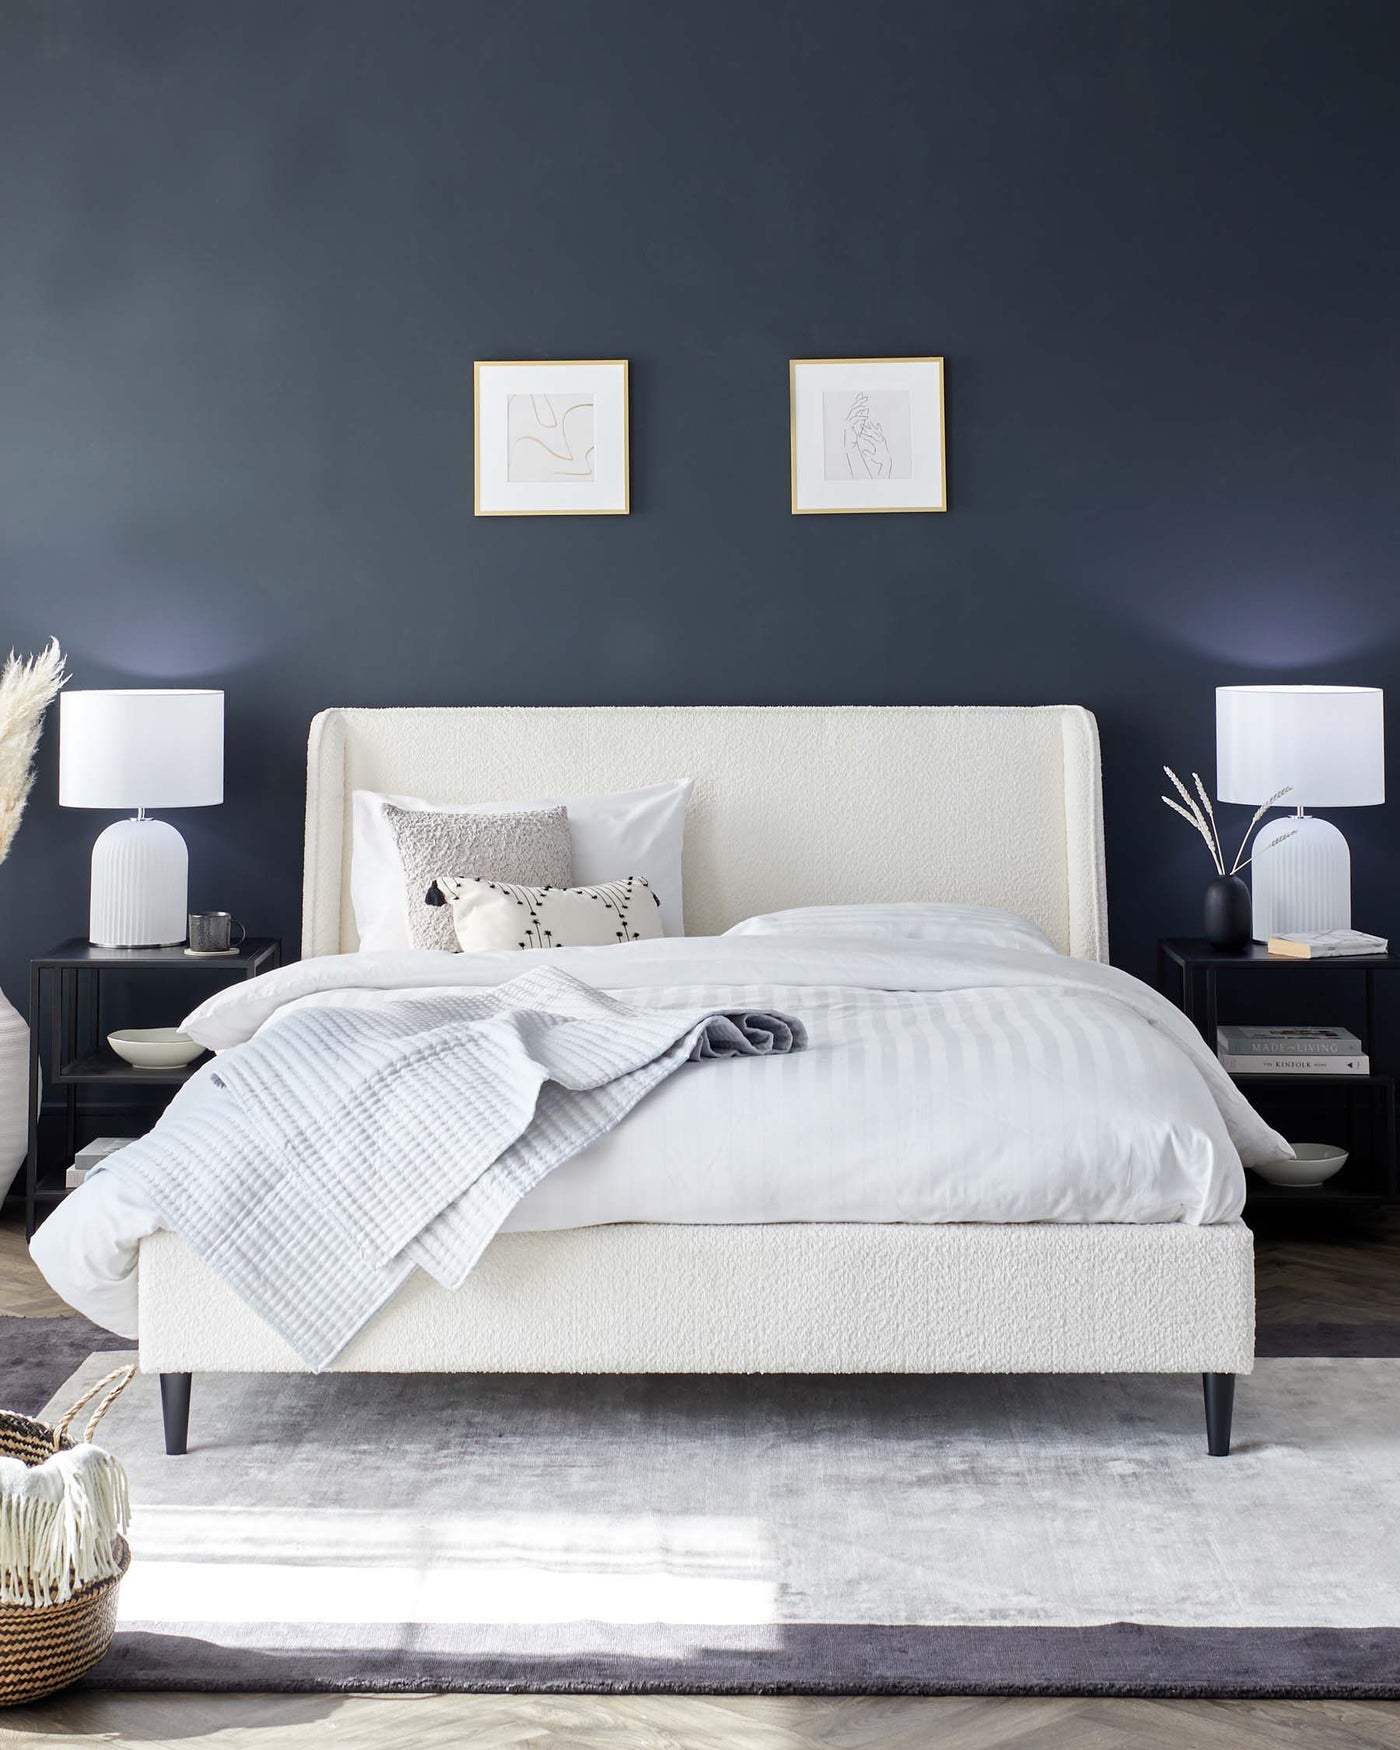 A modern bedroom featuring an upholstered platform bed in a neutral colour with a tufted headboard, flanked by two dark wood nightstands with table lamps atop, set against a dark wall, with abstract framed art above. A textured light rug lies on the floor.